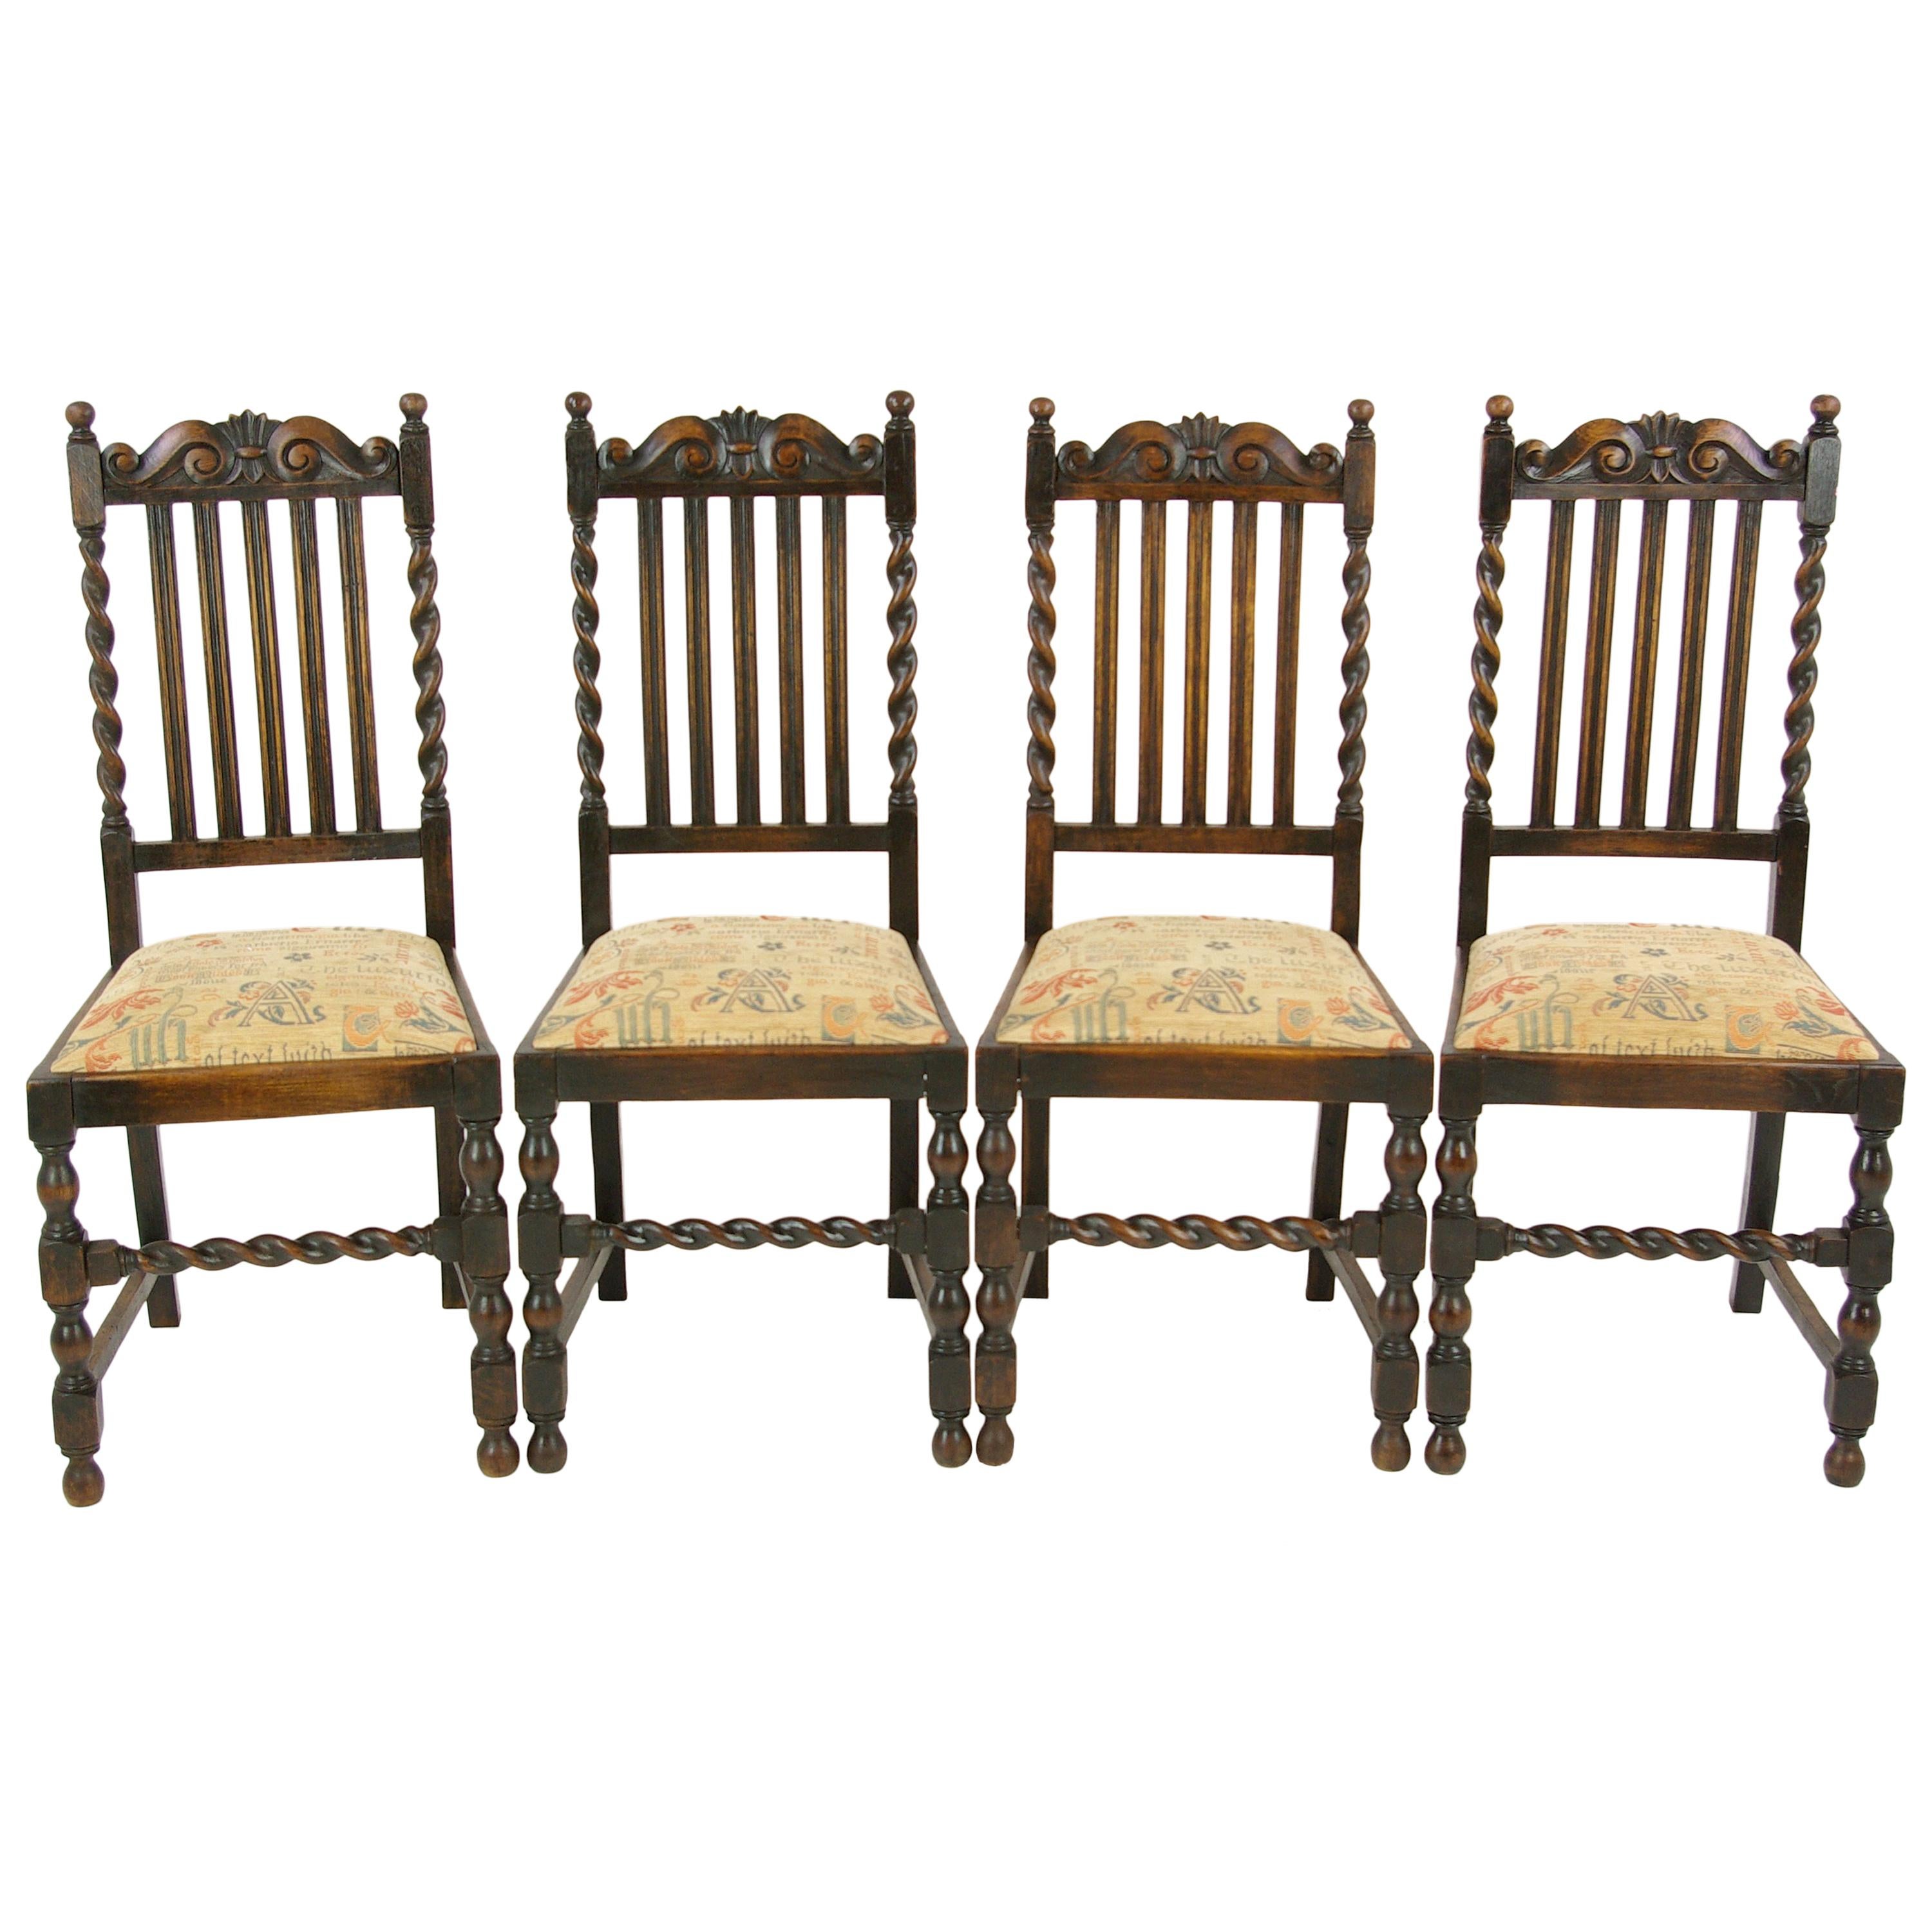 4 Antique Dining Chairs, Barley Twist Oak Dining Chairs, Scotland, 1920s